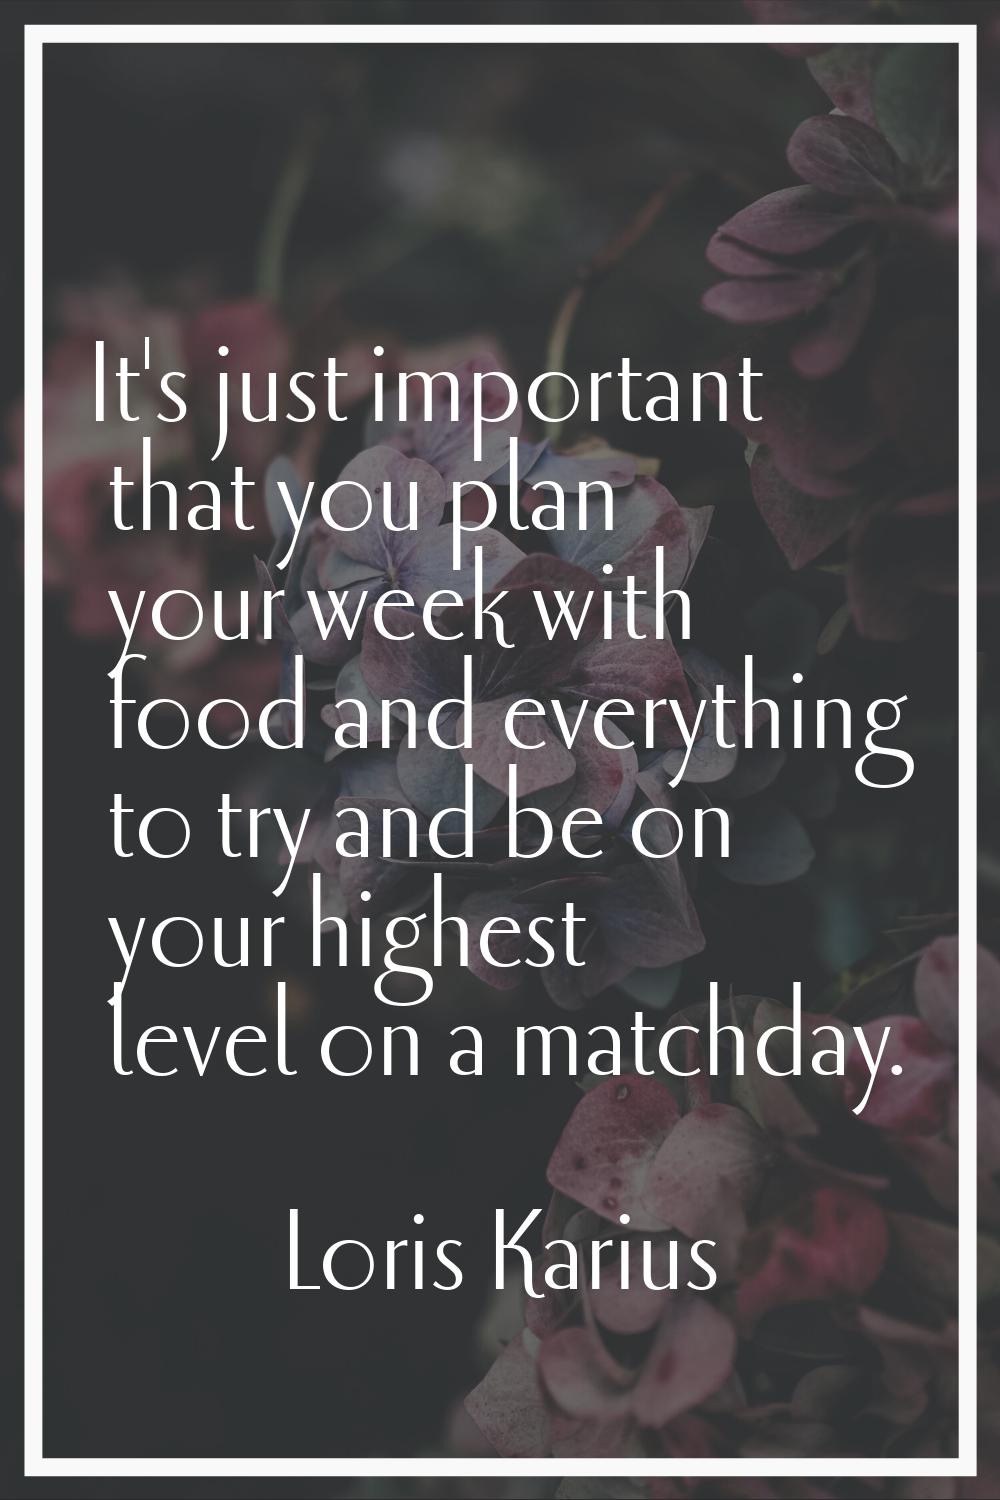 It's just important that you plan your week with food and everything to try and be on your highest 